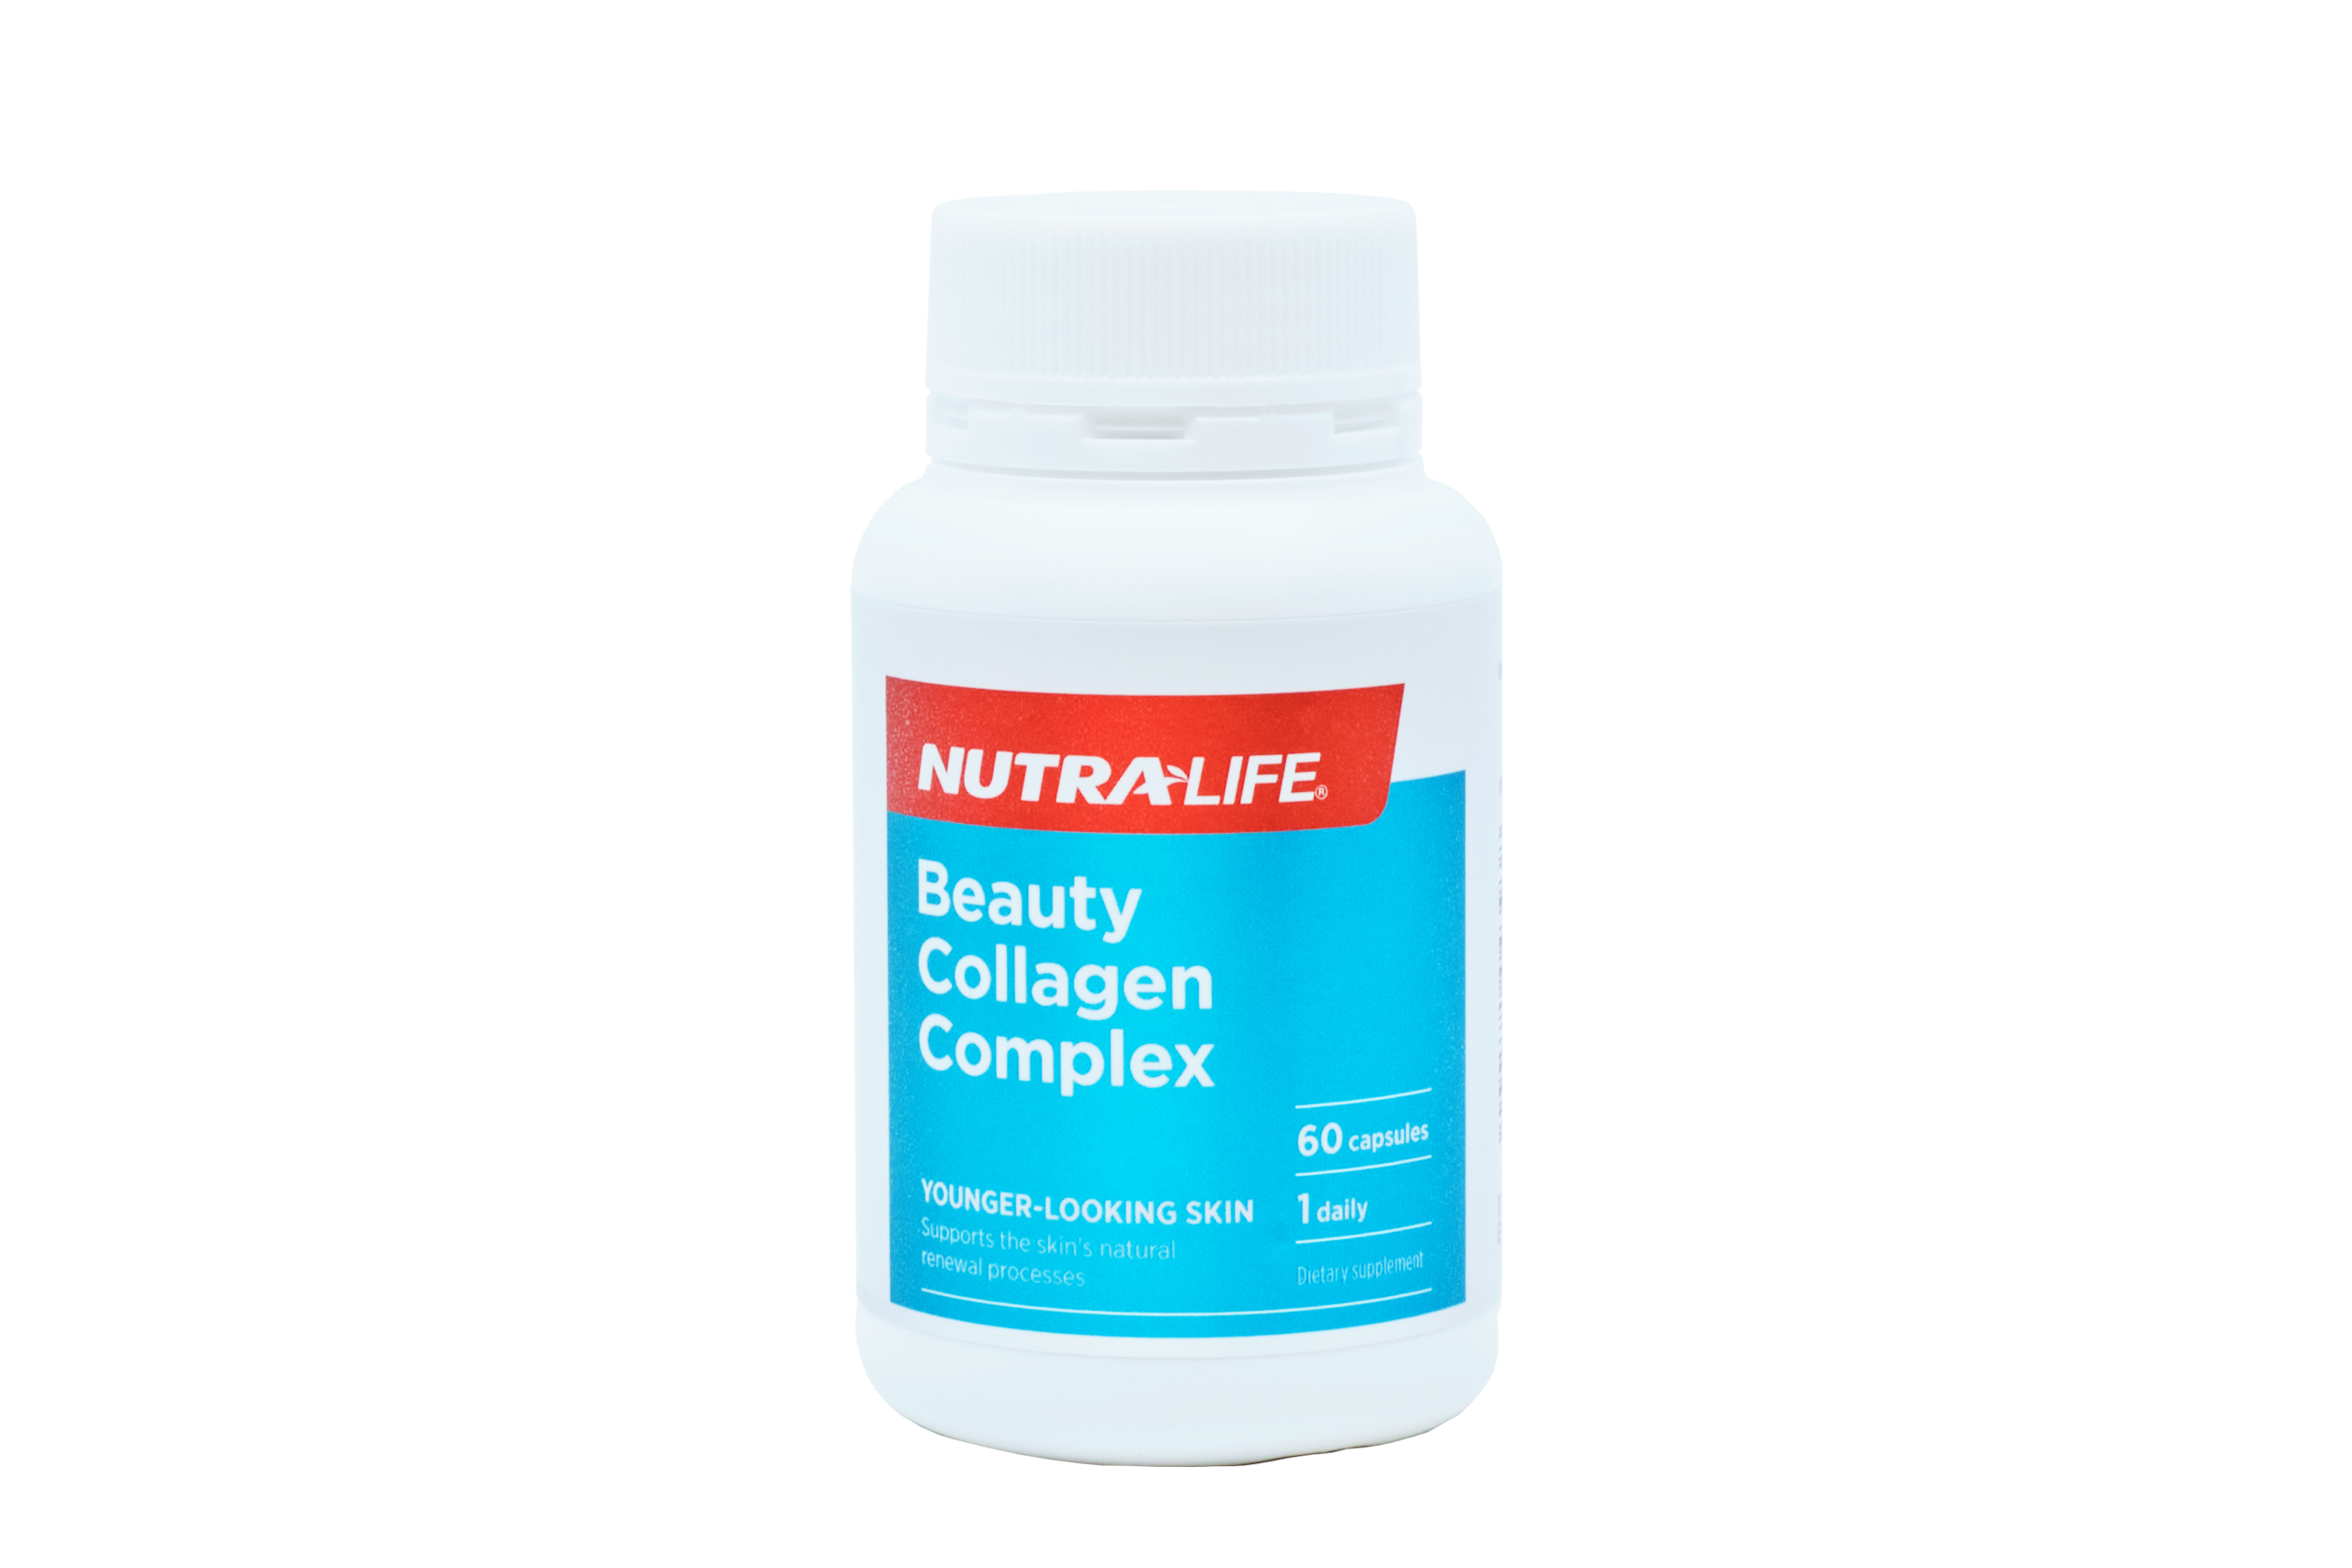 NUTRALIFE Beauty Collagen Complex 60 Capsules - 365 Health Limited